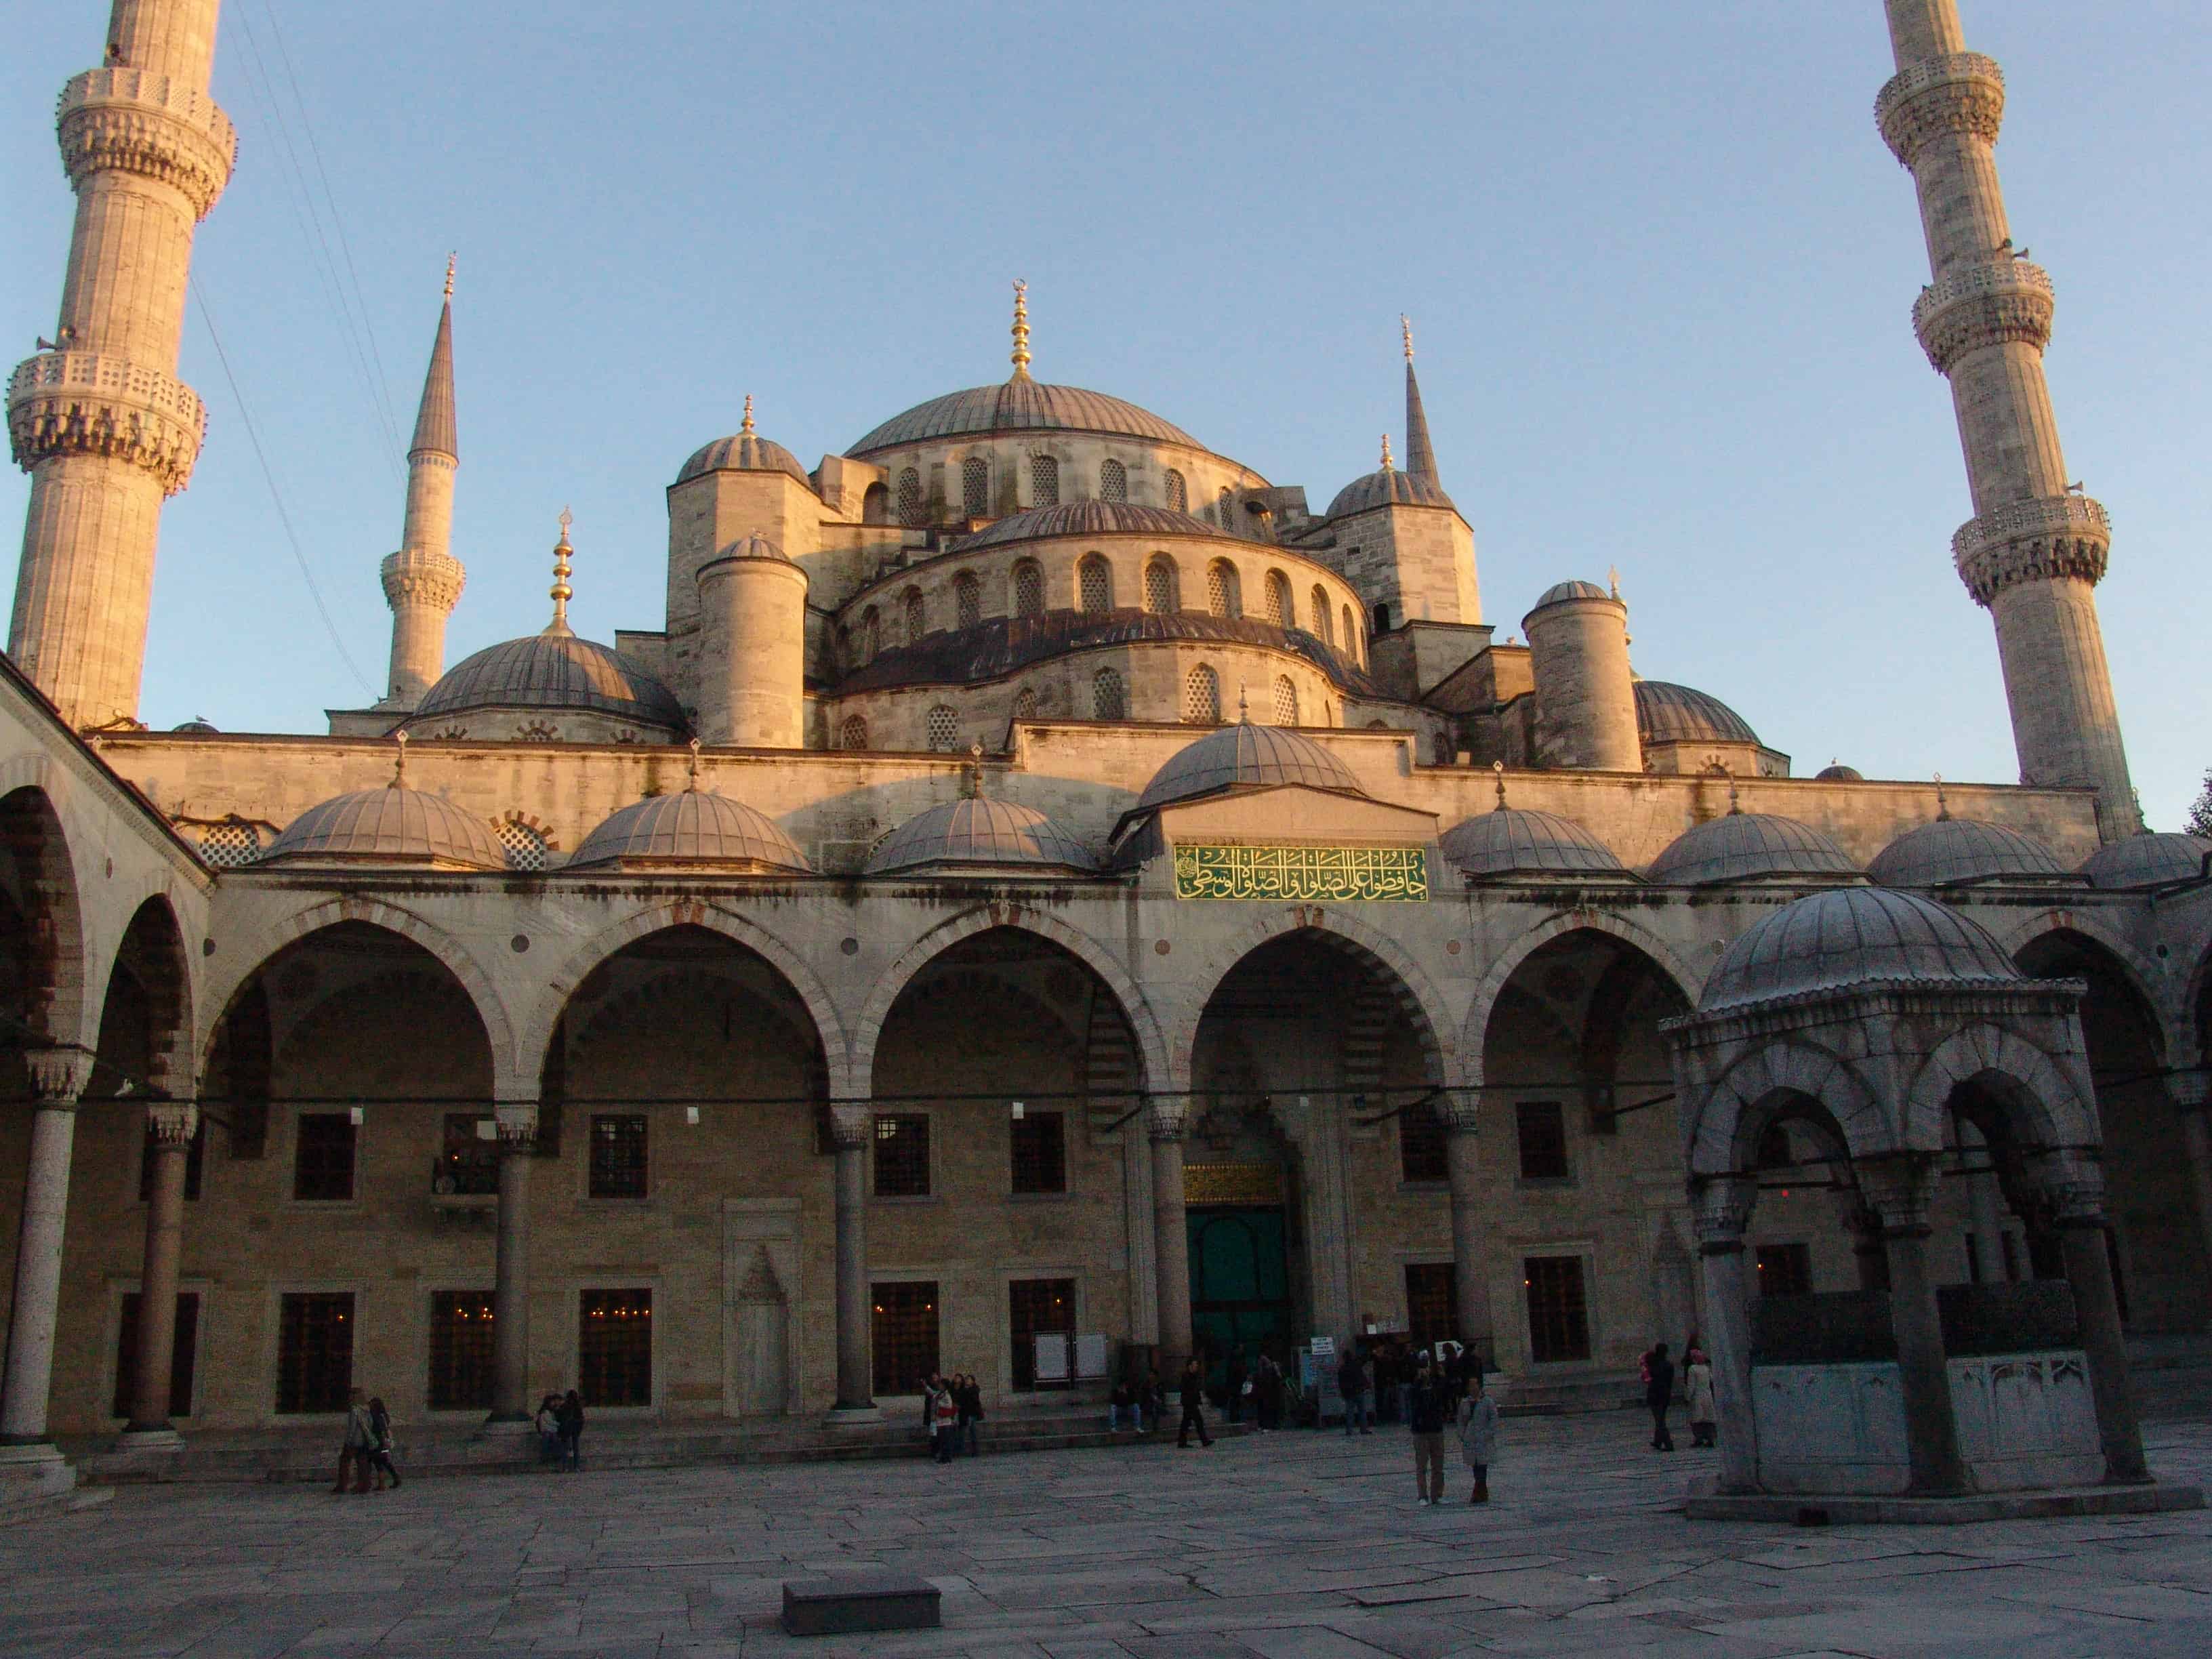 Courtyard of the Sultan Ahmet Camii (Blue Mosque) in Fatih, Istanbul, Turkey